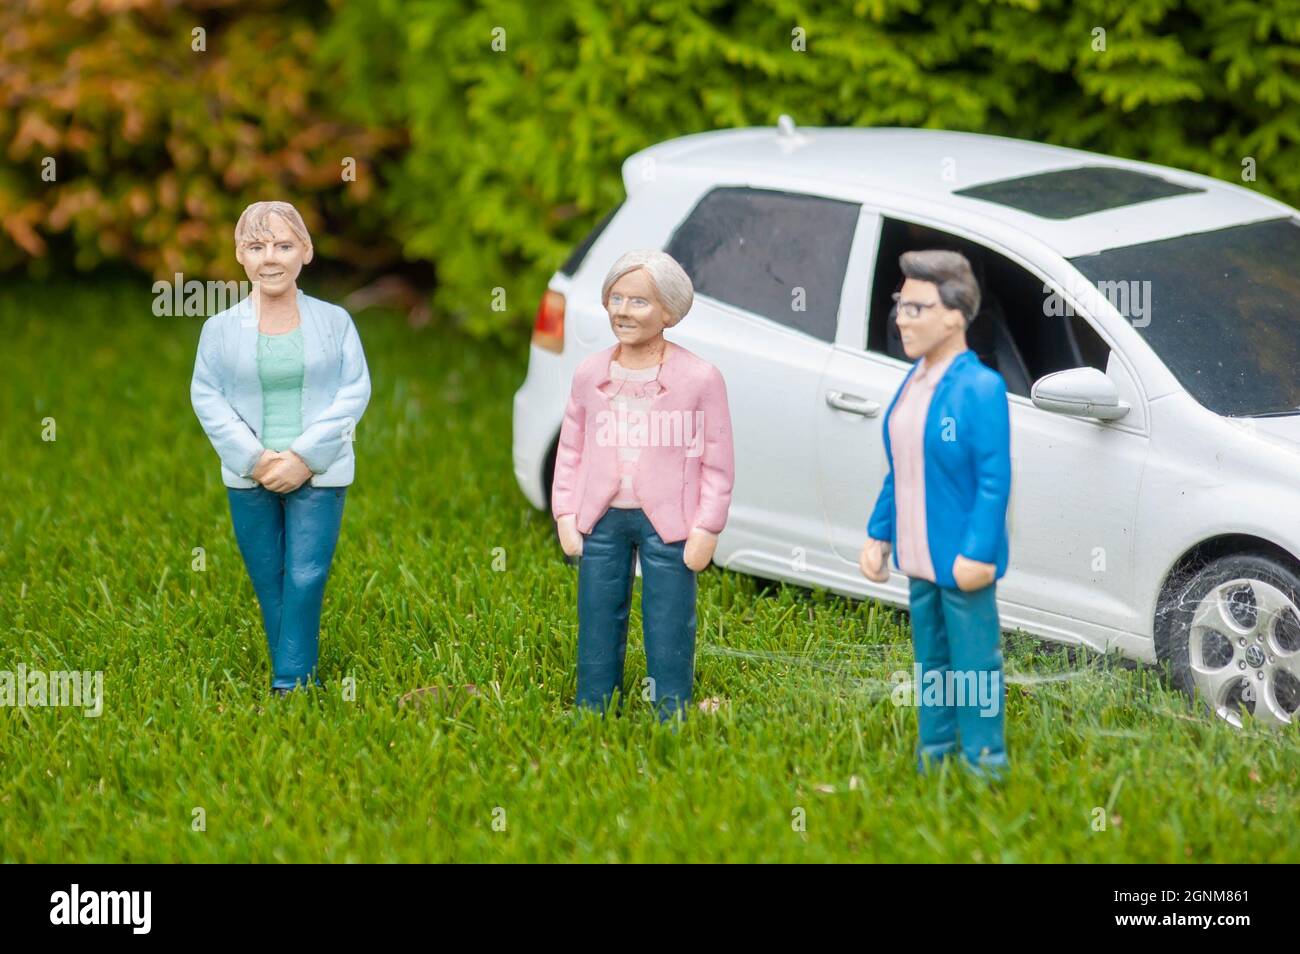 BABBACOMBE, TORQUAY, ENGLAND- 26 June 2021: The Great British Bake Off figurines of Mary, Mel and Sue at Babbacombe Model Village in Torquay Stock Photo